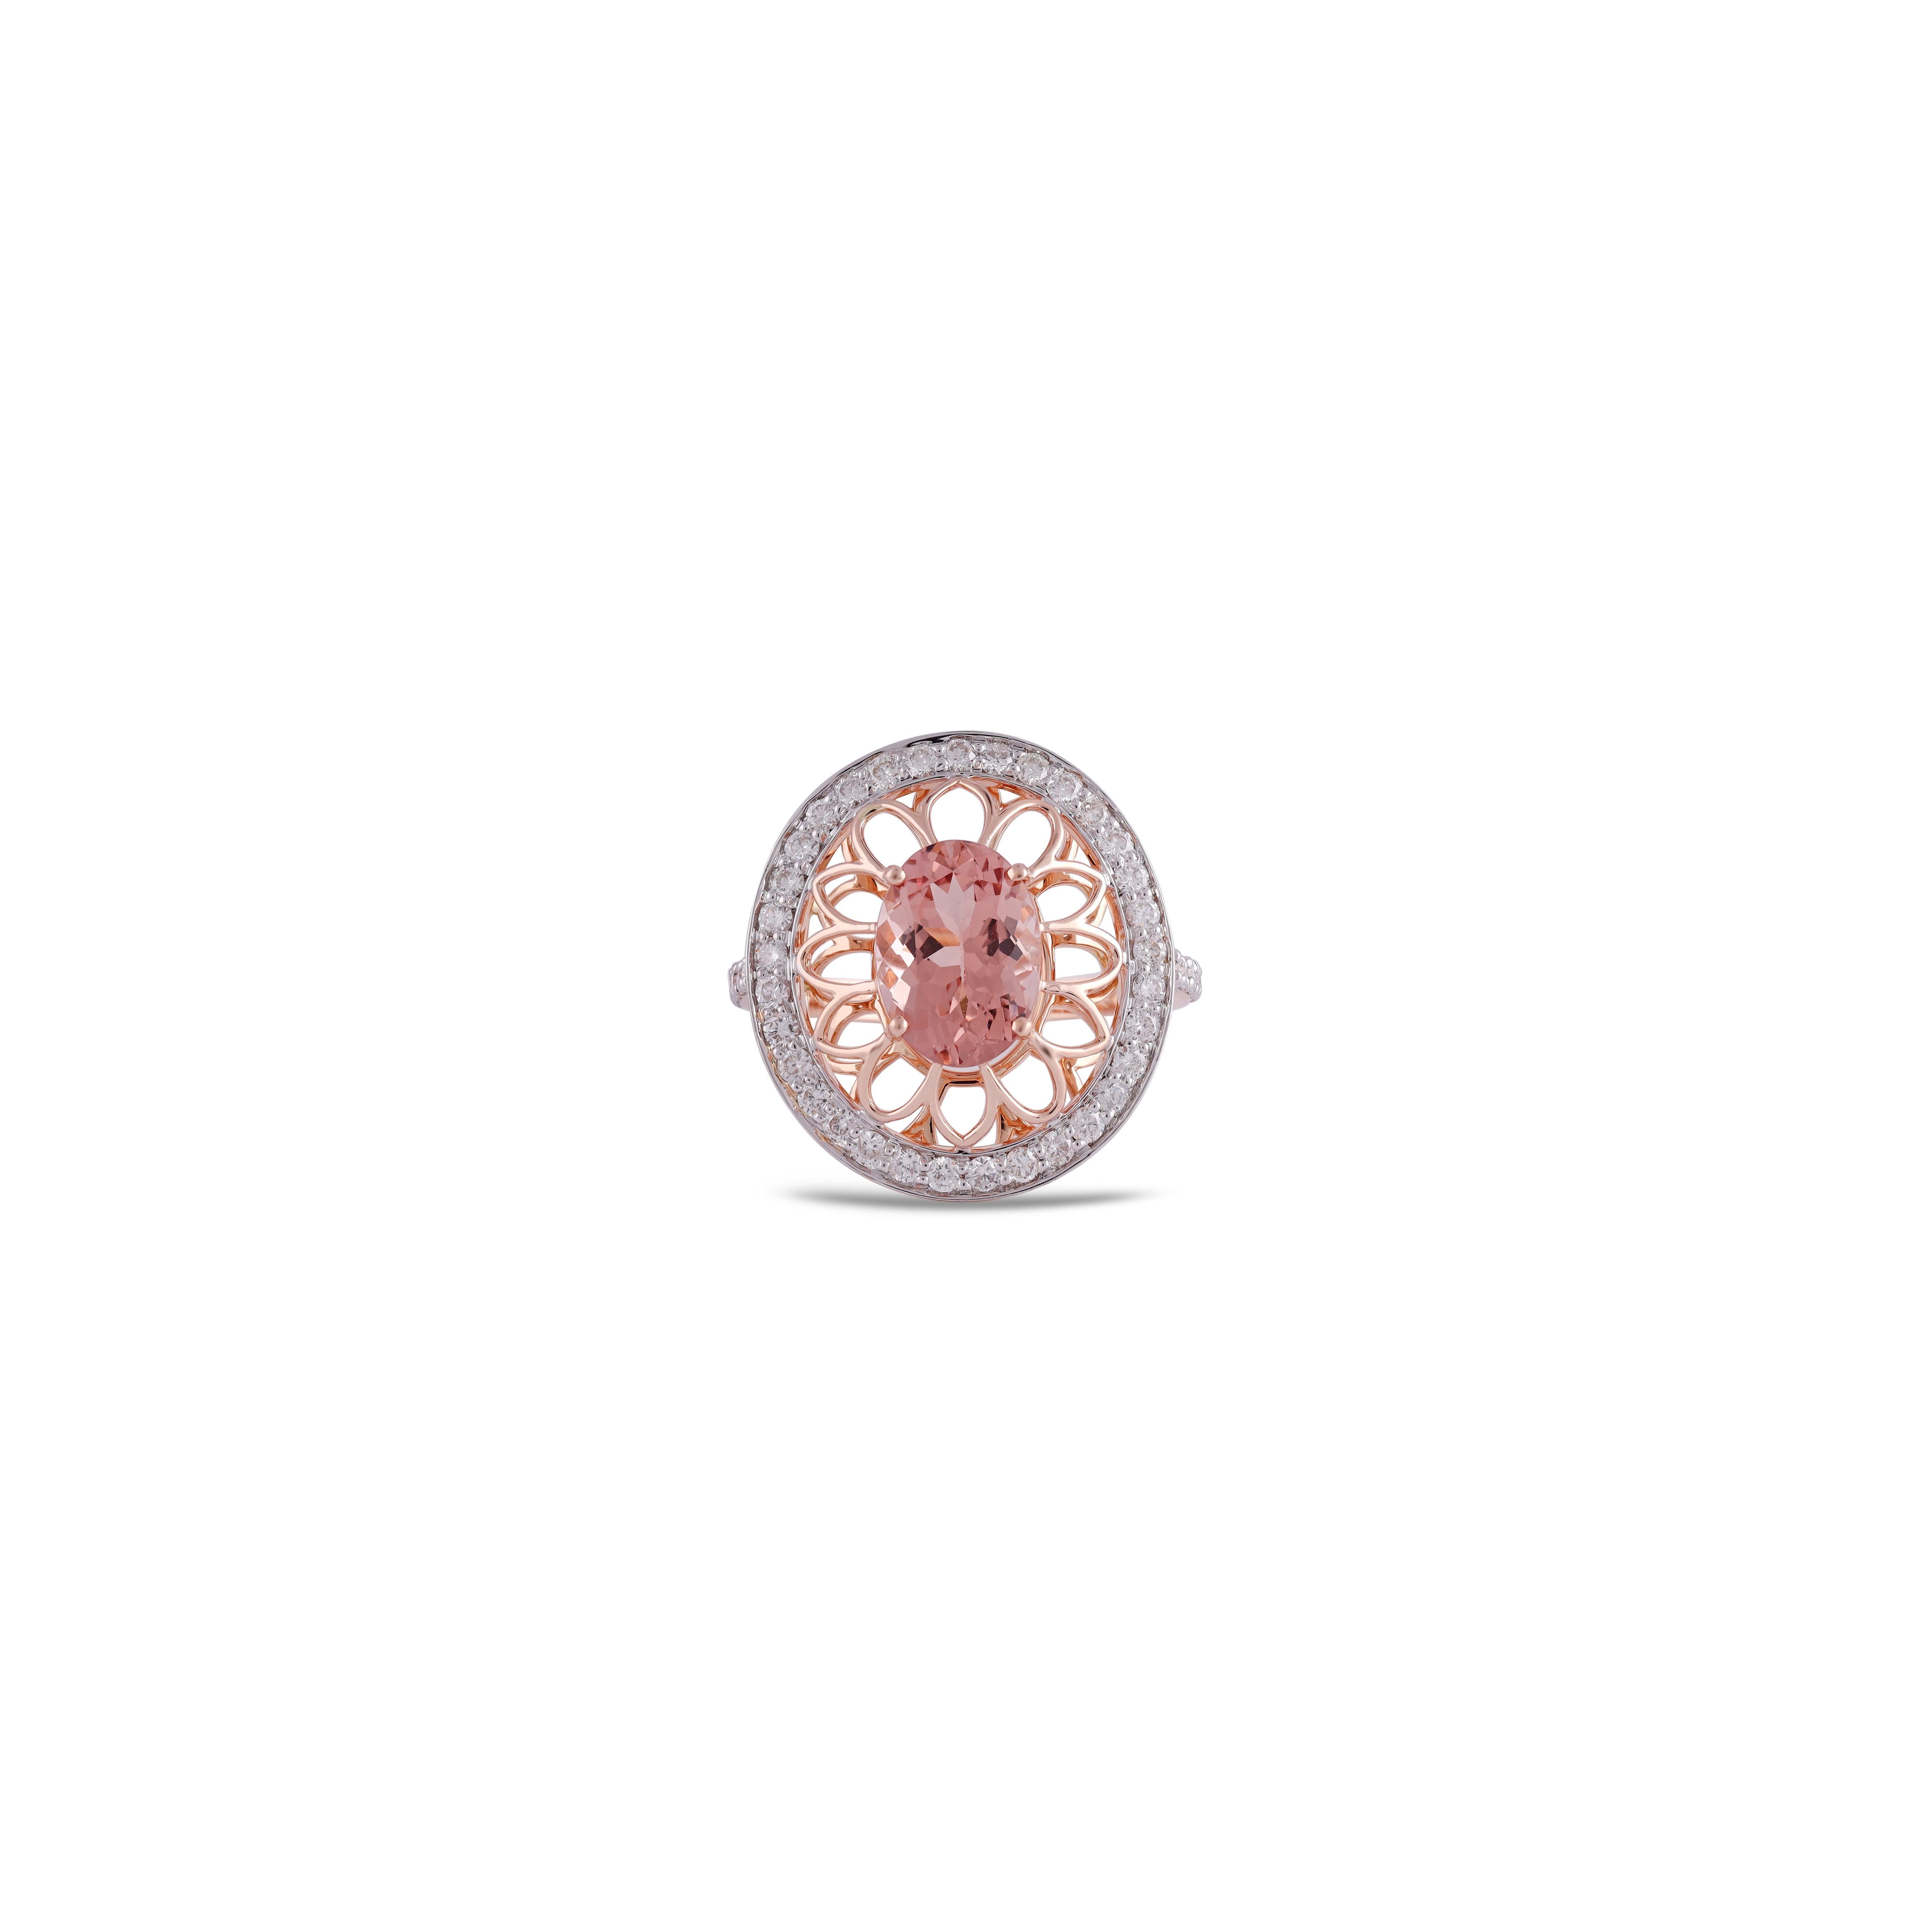 If you are looking for Morganite Ring, this is the ultimate find, (2.57 carats) of the finest Morganite color is the focal point  Perfectly matched in color, size, luster, and transparency. The color is what you want. The diamonds  surrounding the